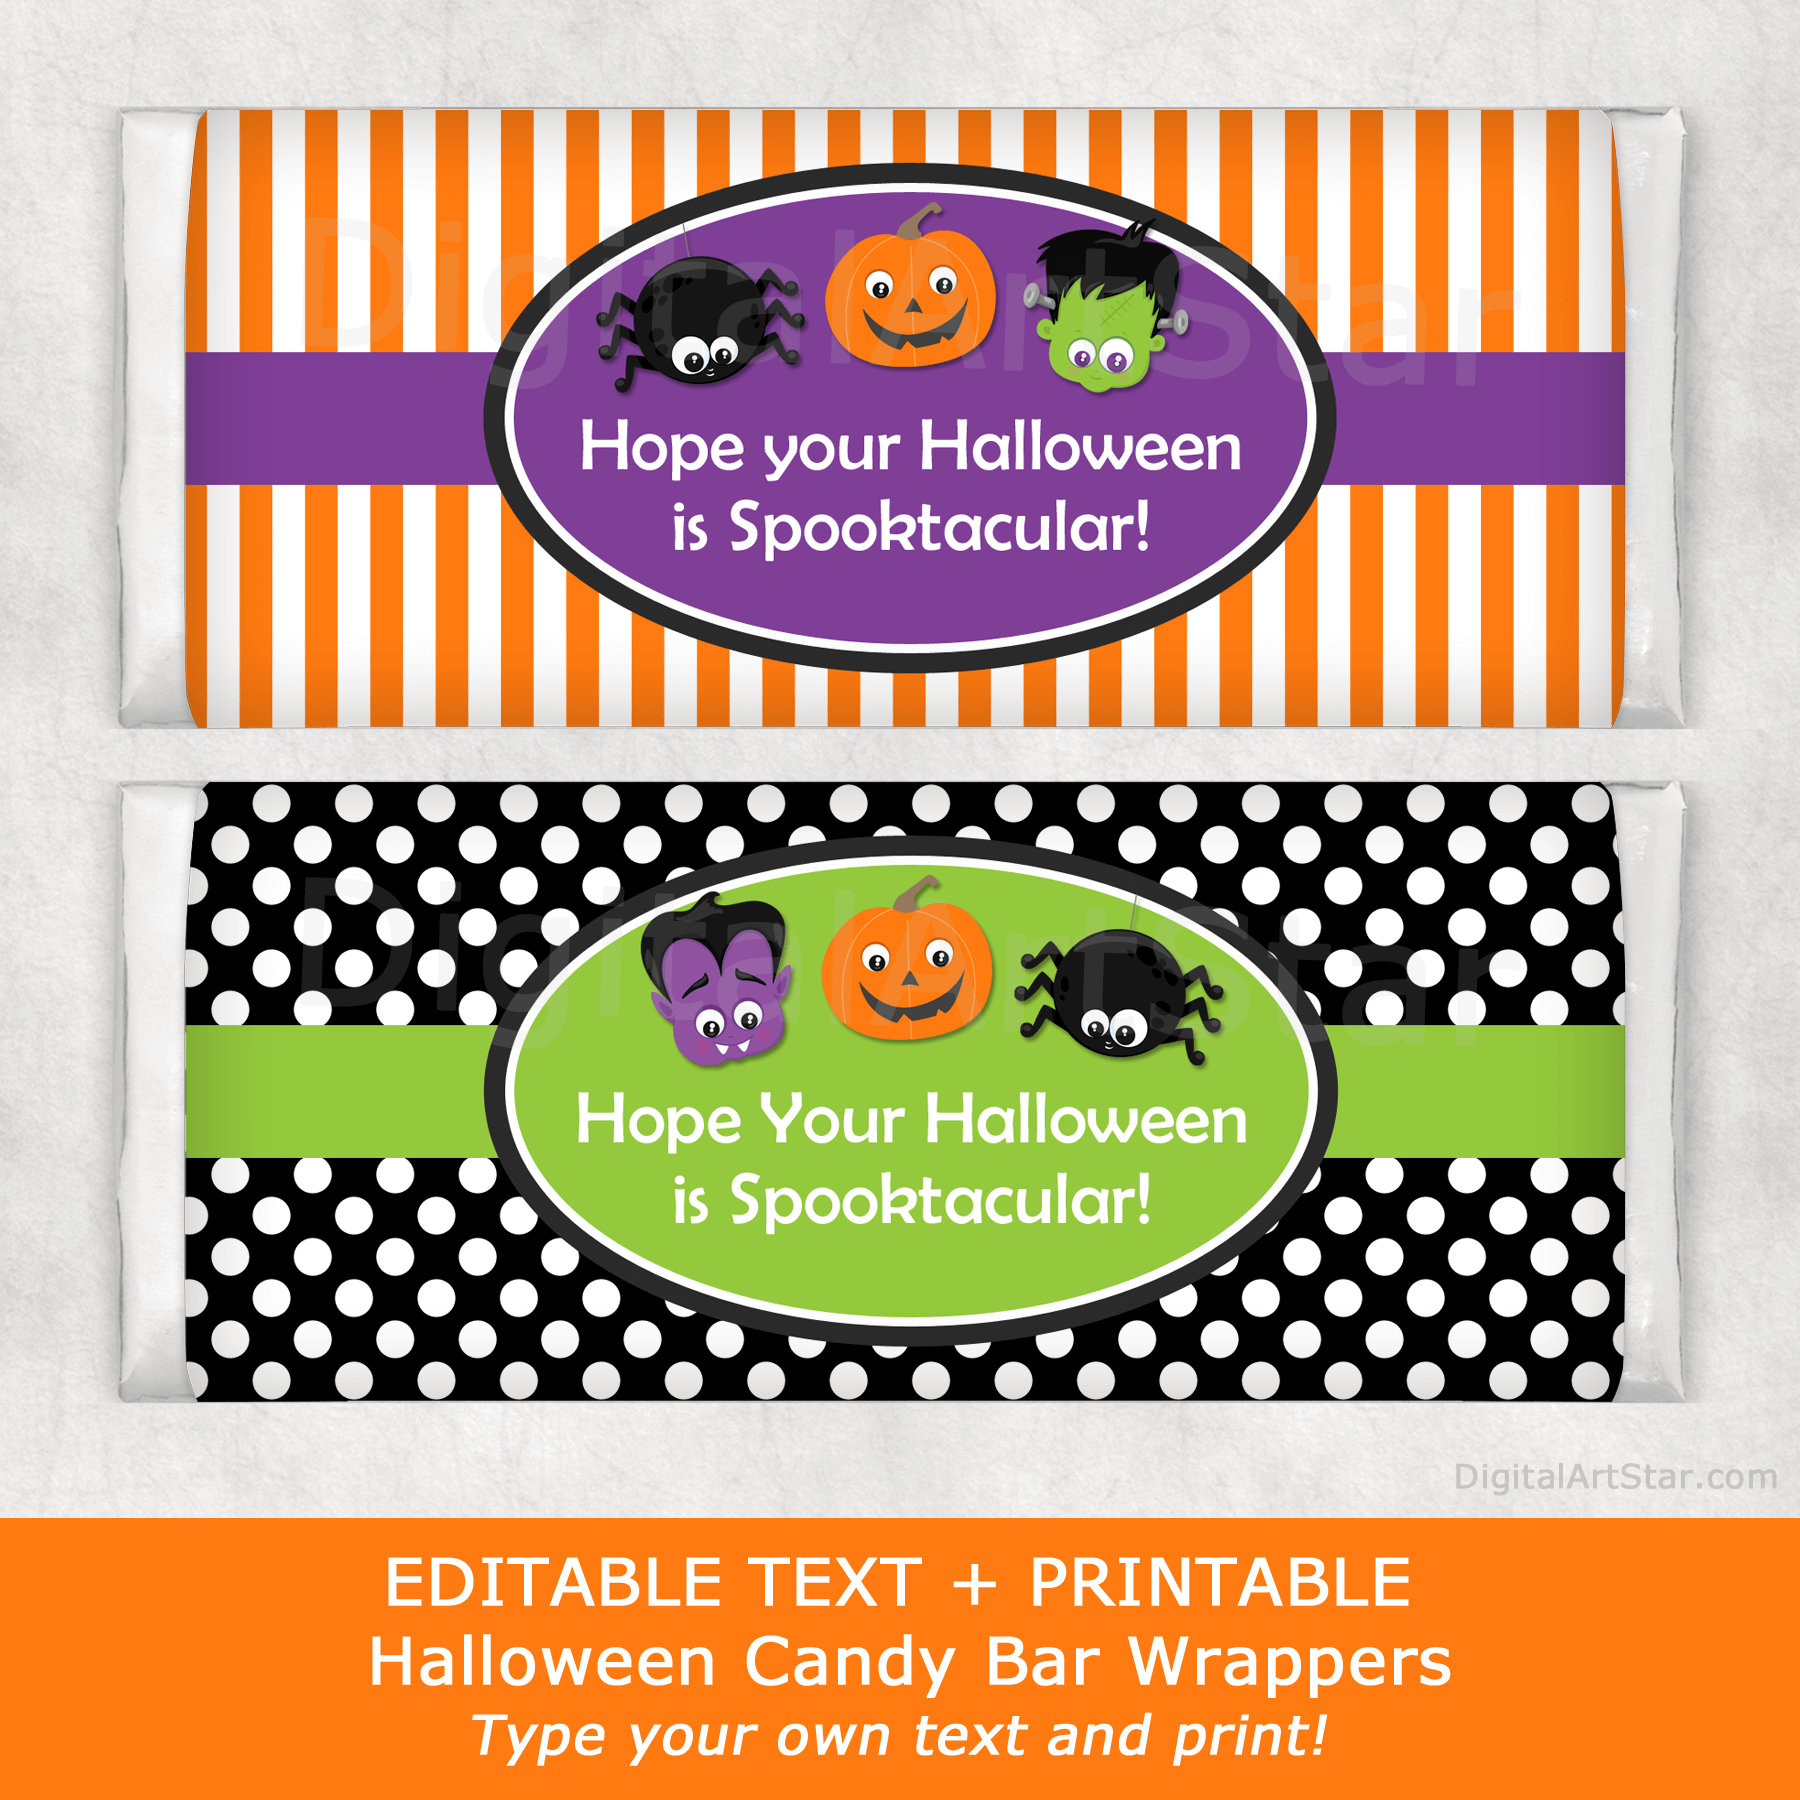 Halloween Candy Bar Wrappers with Monsters, Jack-o-Lantern, Spider